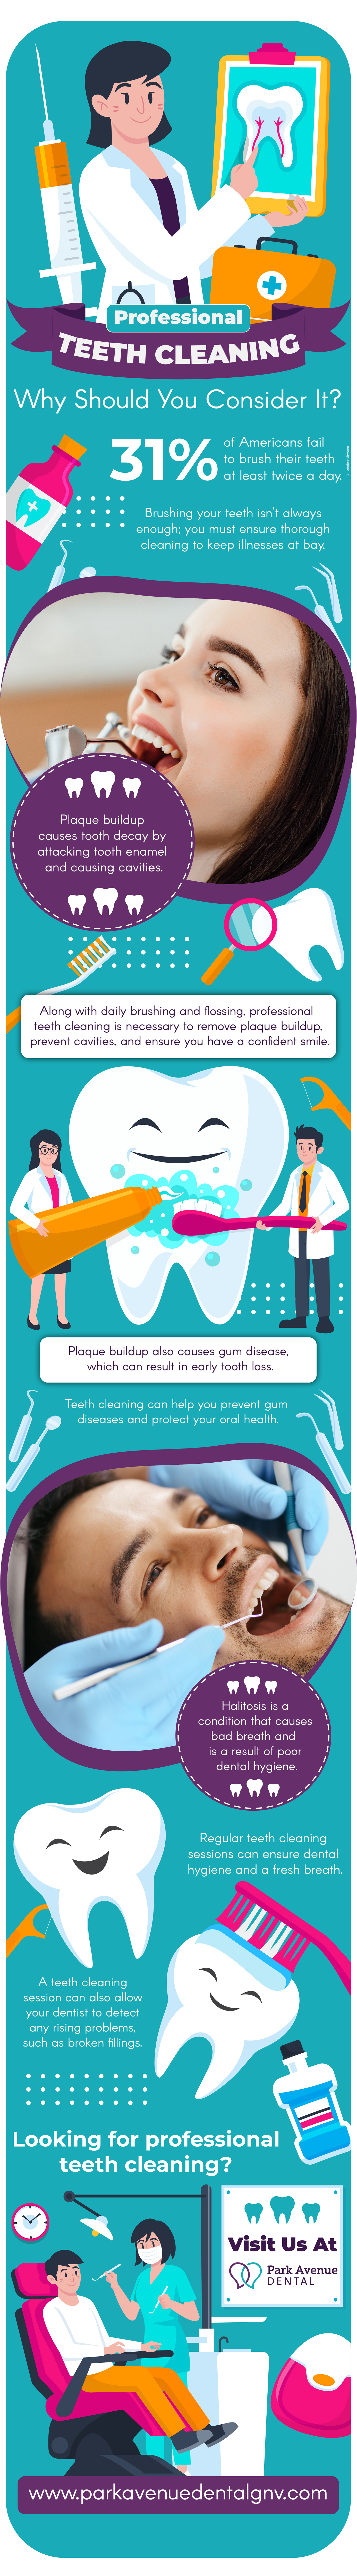 Professional Teeth Cleaning-Why Should You Consider It?-INFOGRAPHIC